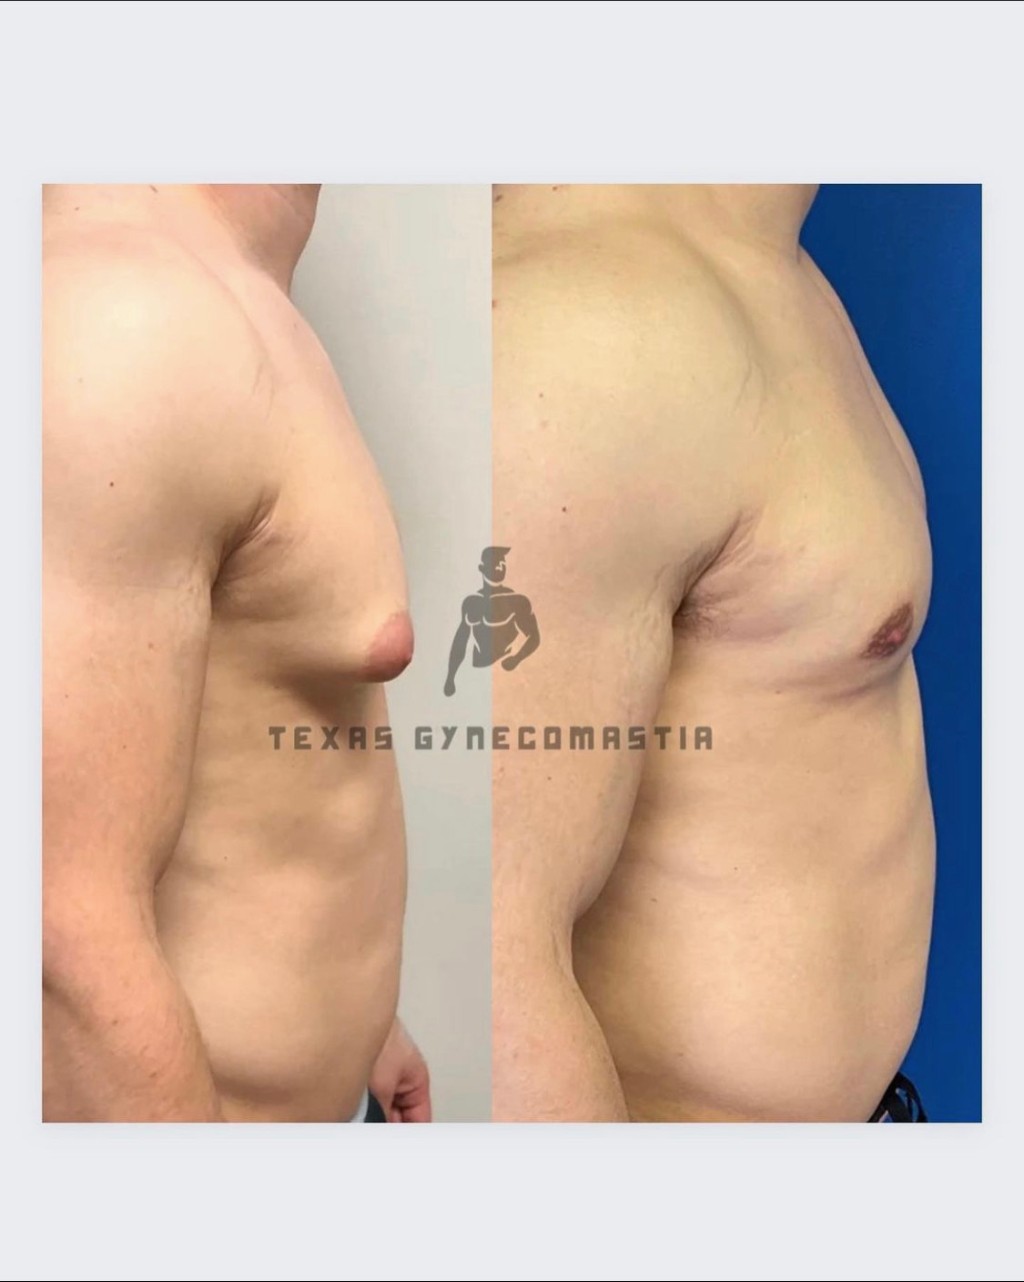 Gyno removal surgery by Dr. Azouz in Dallas, TX